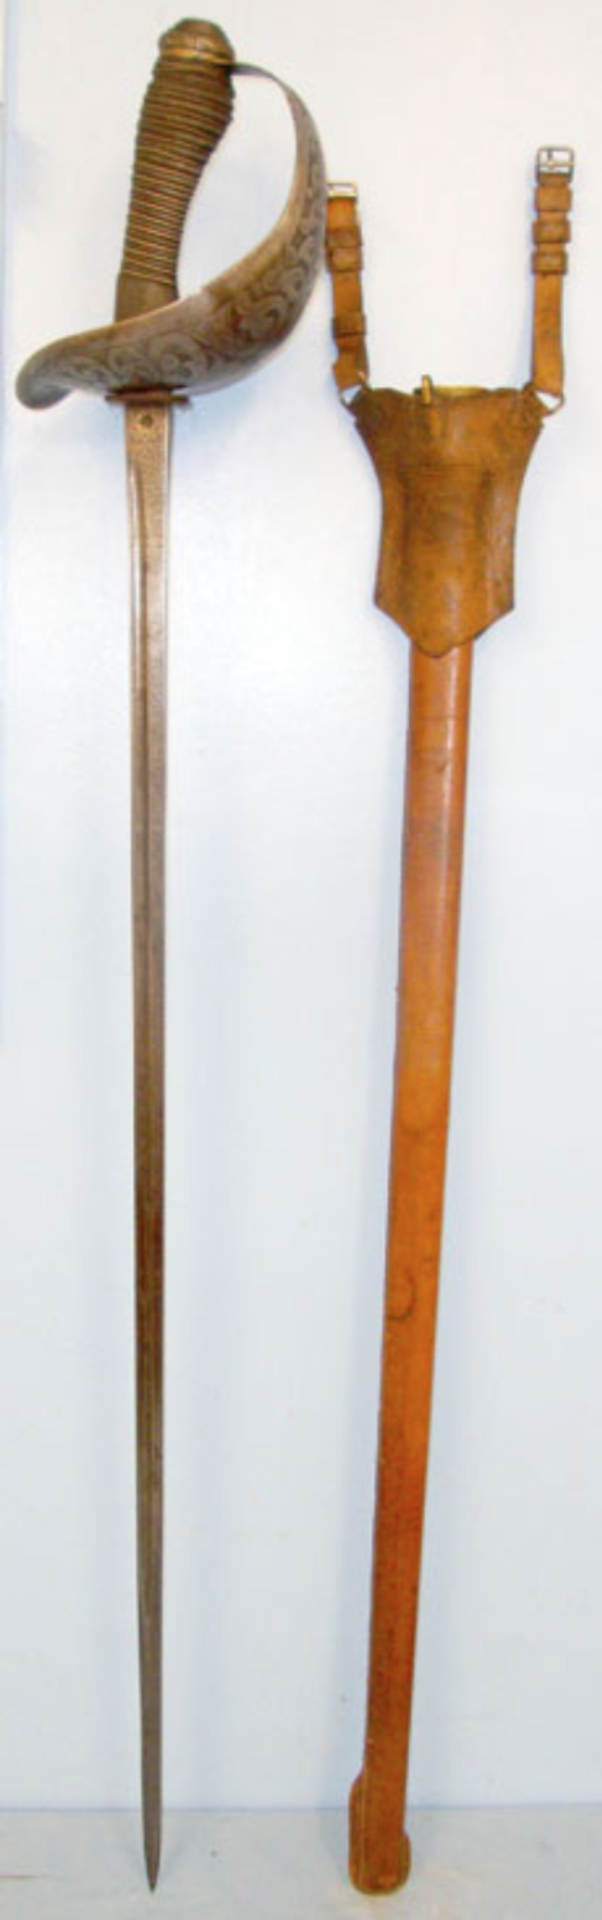 WW1 British Henry Wilkinson Pall Mall London 1912 Pattern Heavy Cavalry Troopers Sword - Image 2 of 3